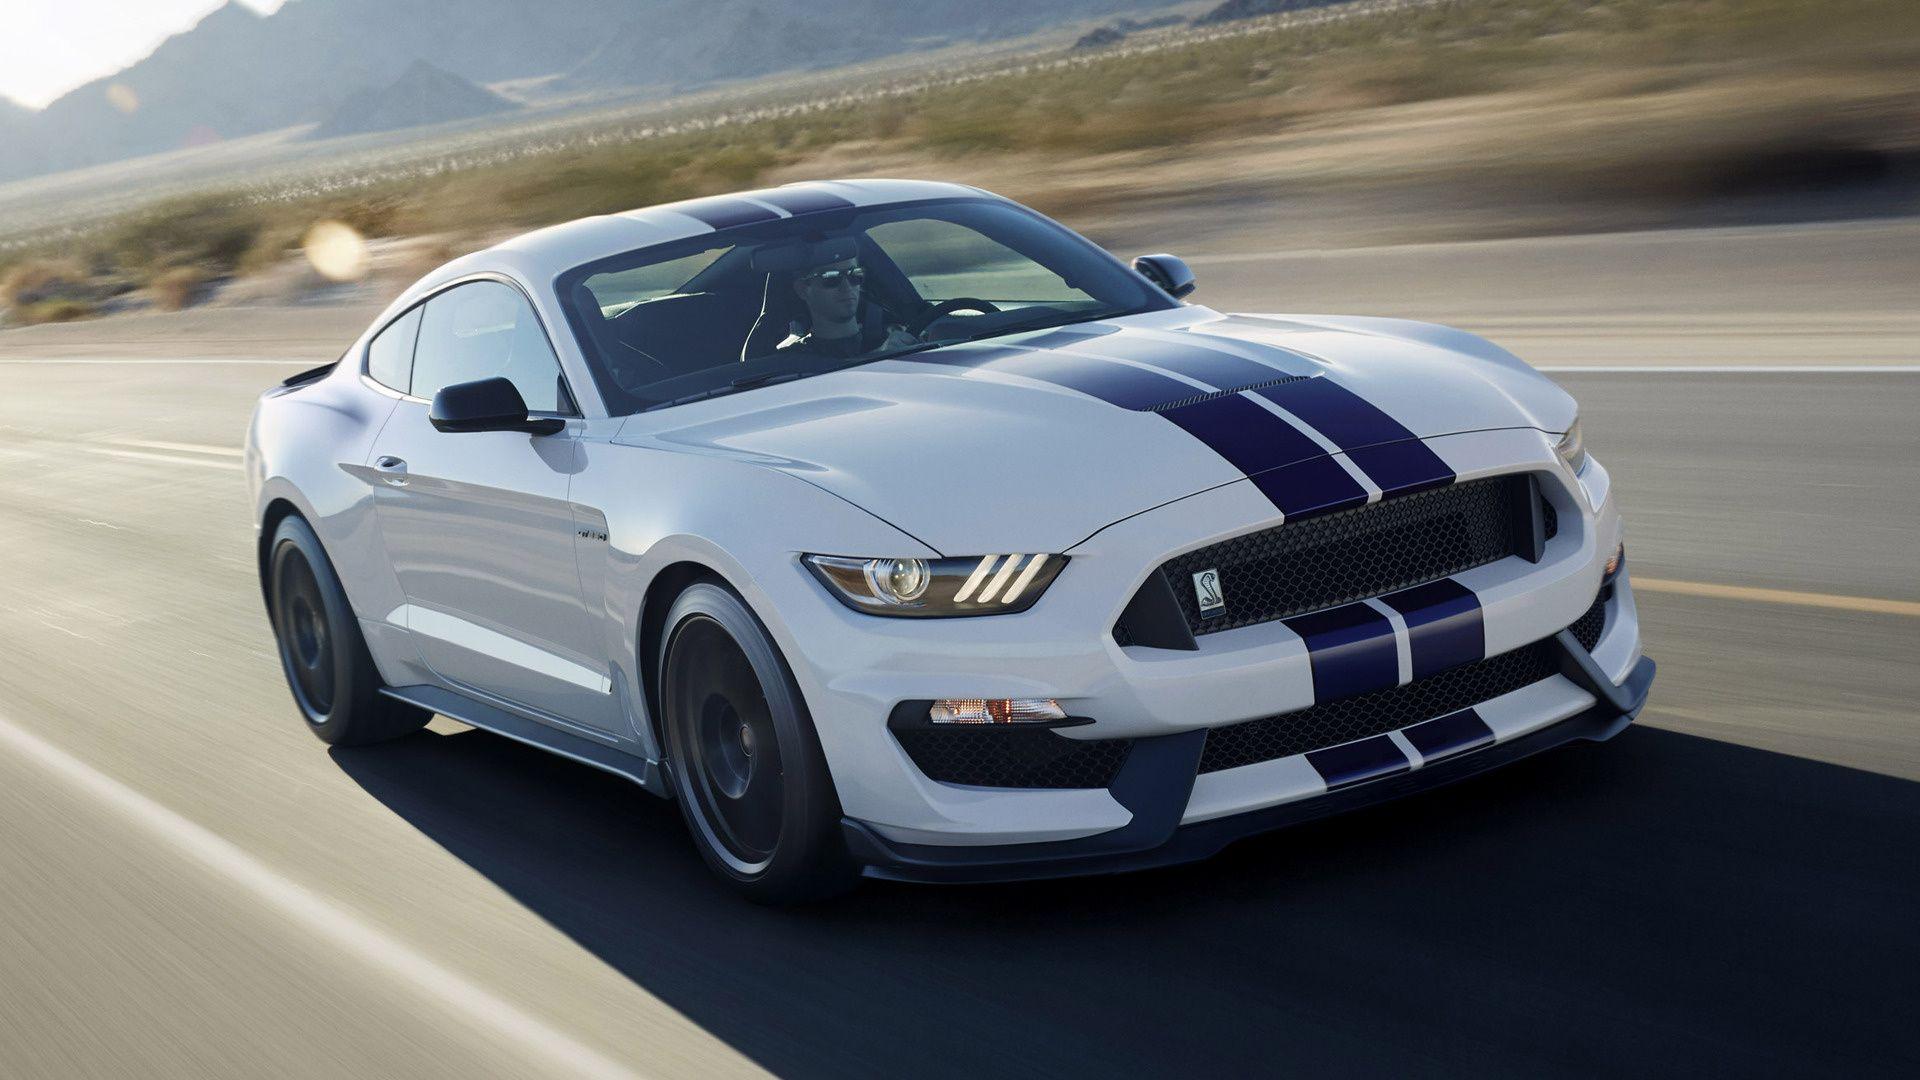 Shelby GT350 Mustang (2016) Wallpaper and HD Image